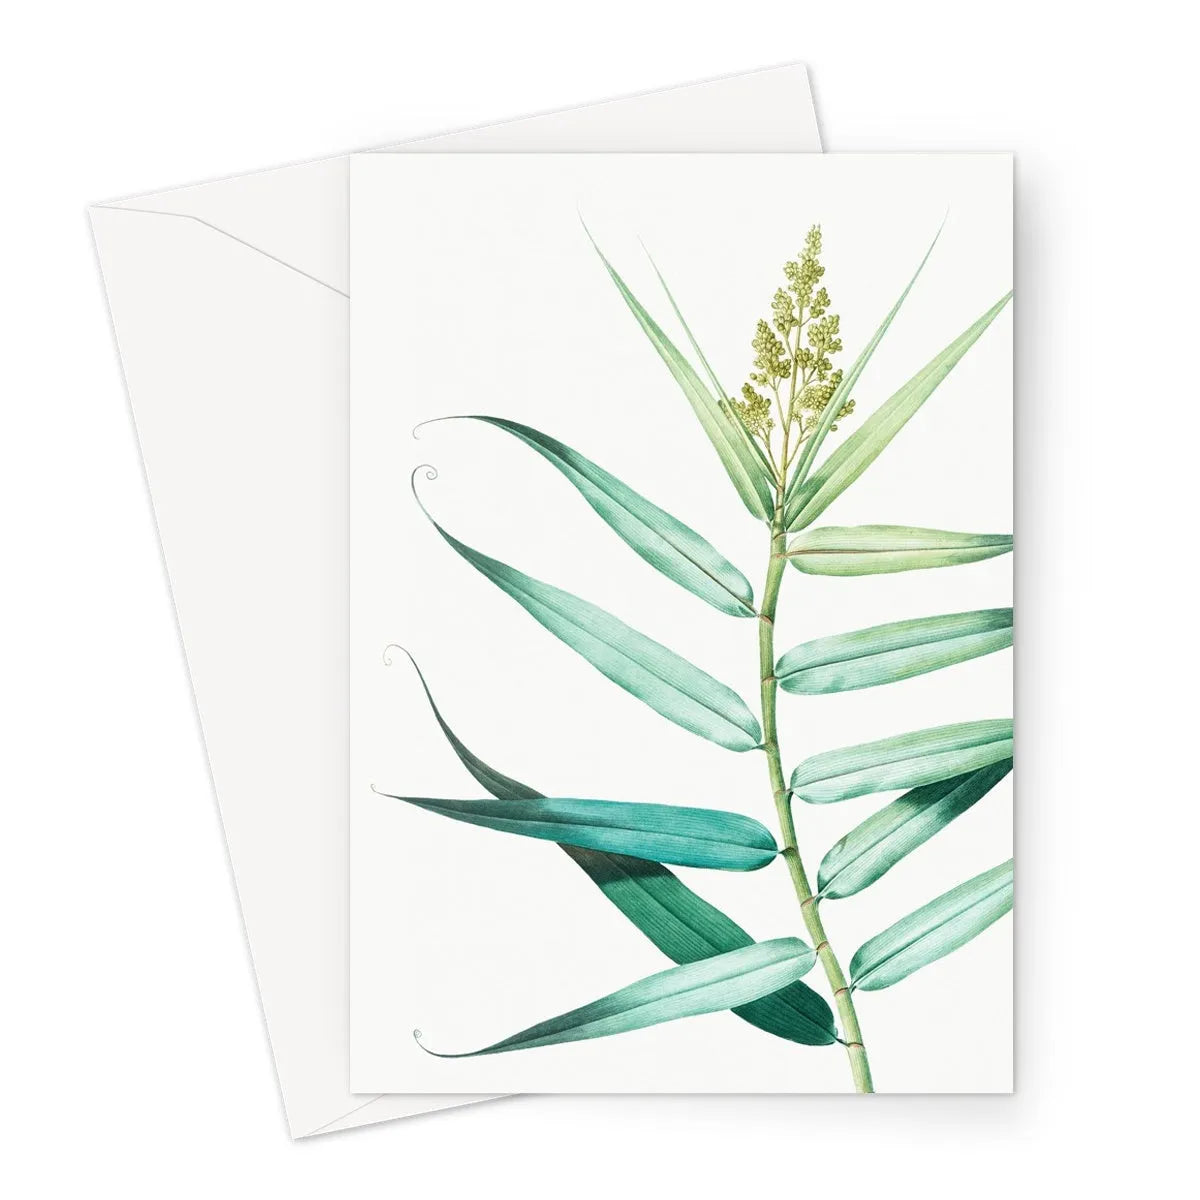 Bush Cane By Pierre-joseph Redouté Greeting Card - A5 Portrait / 1 Card - Greeting & Note Cards - Aesthetic Art